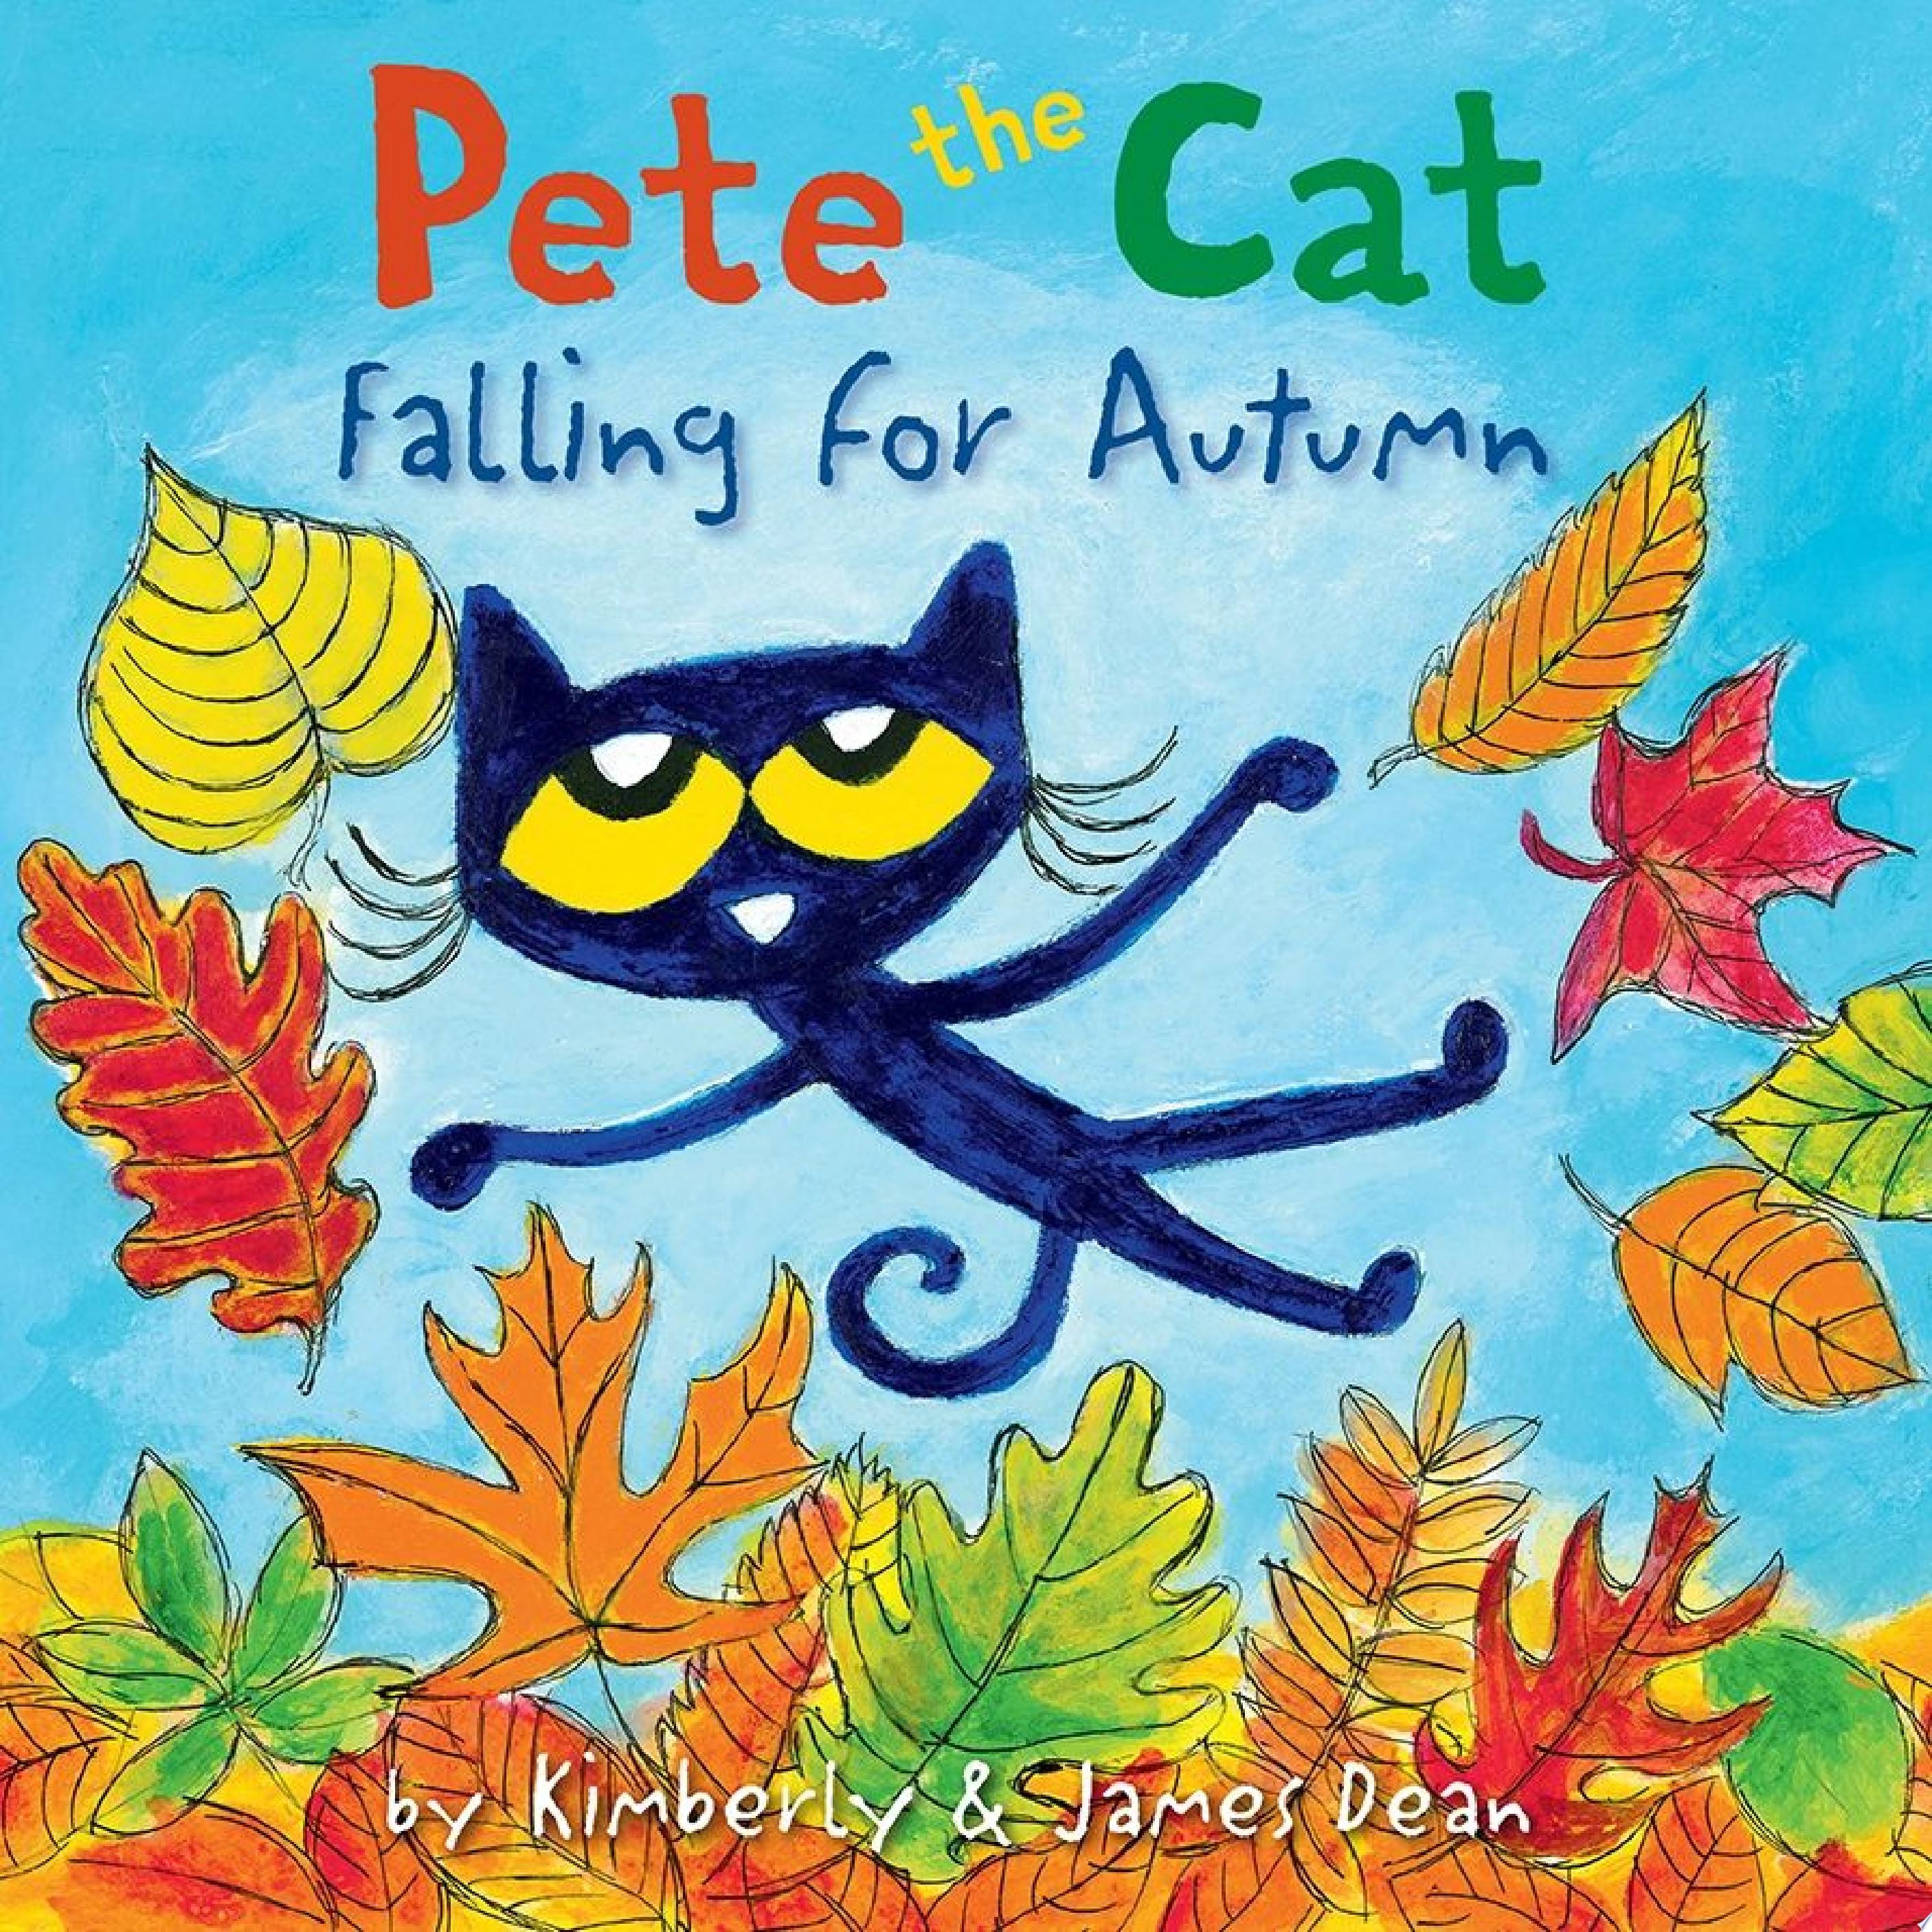 Image for "Pete the Cat Falling for Autumn"